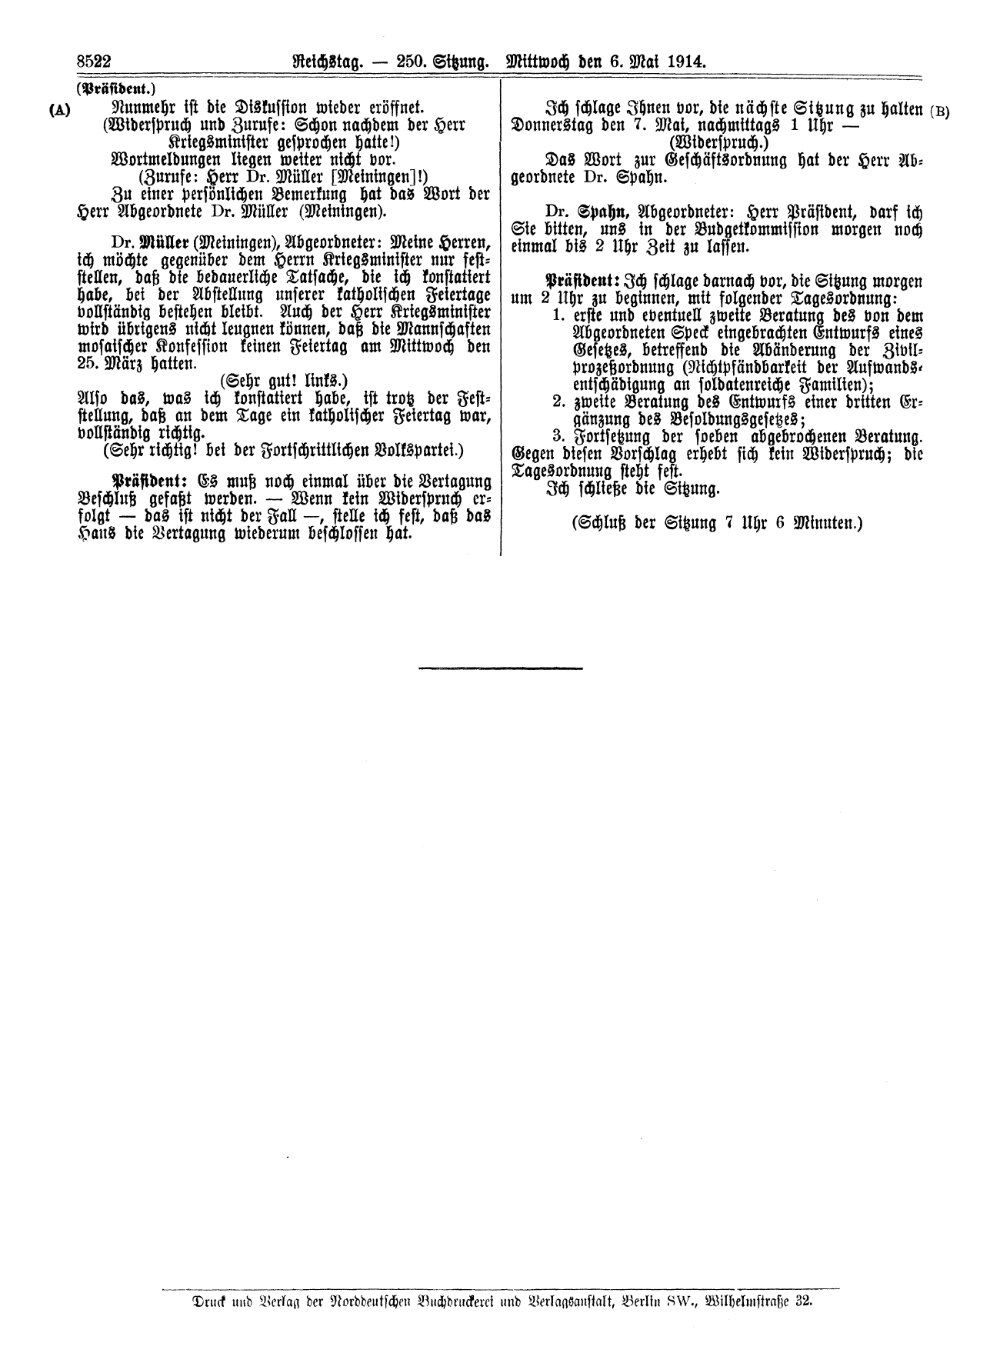 Scan of page 8522